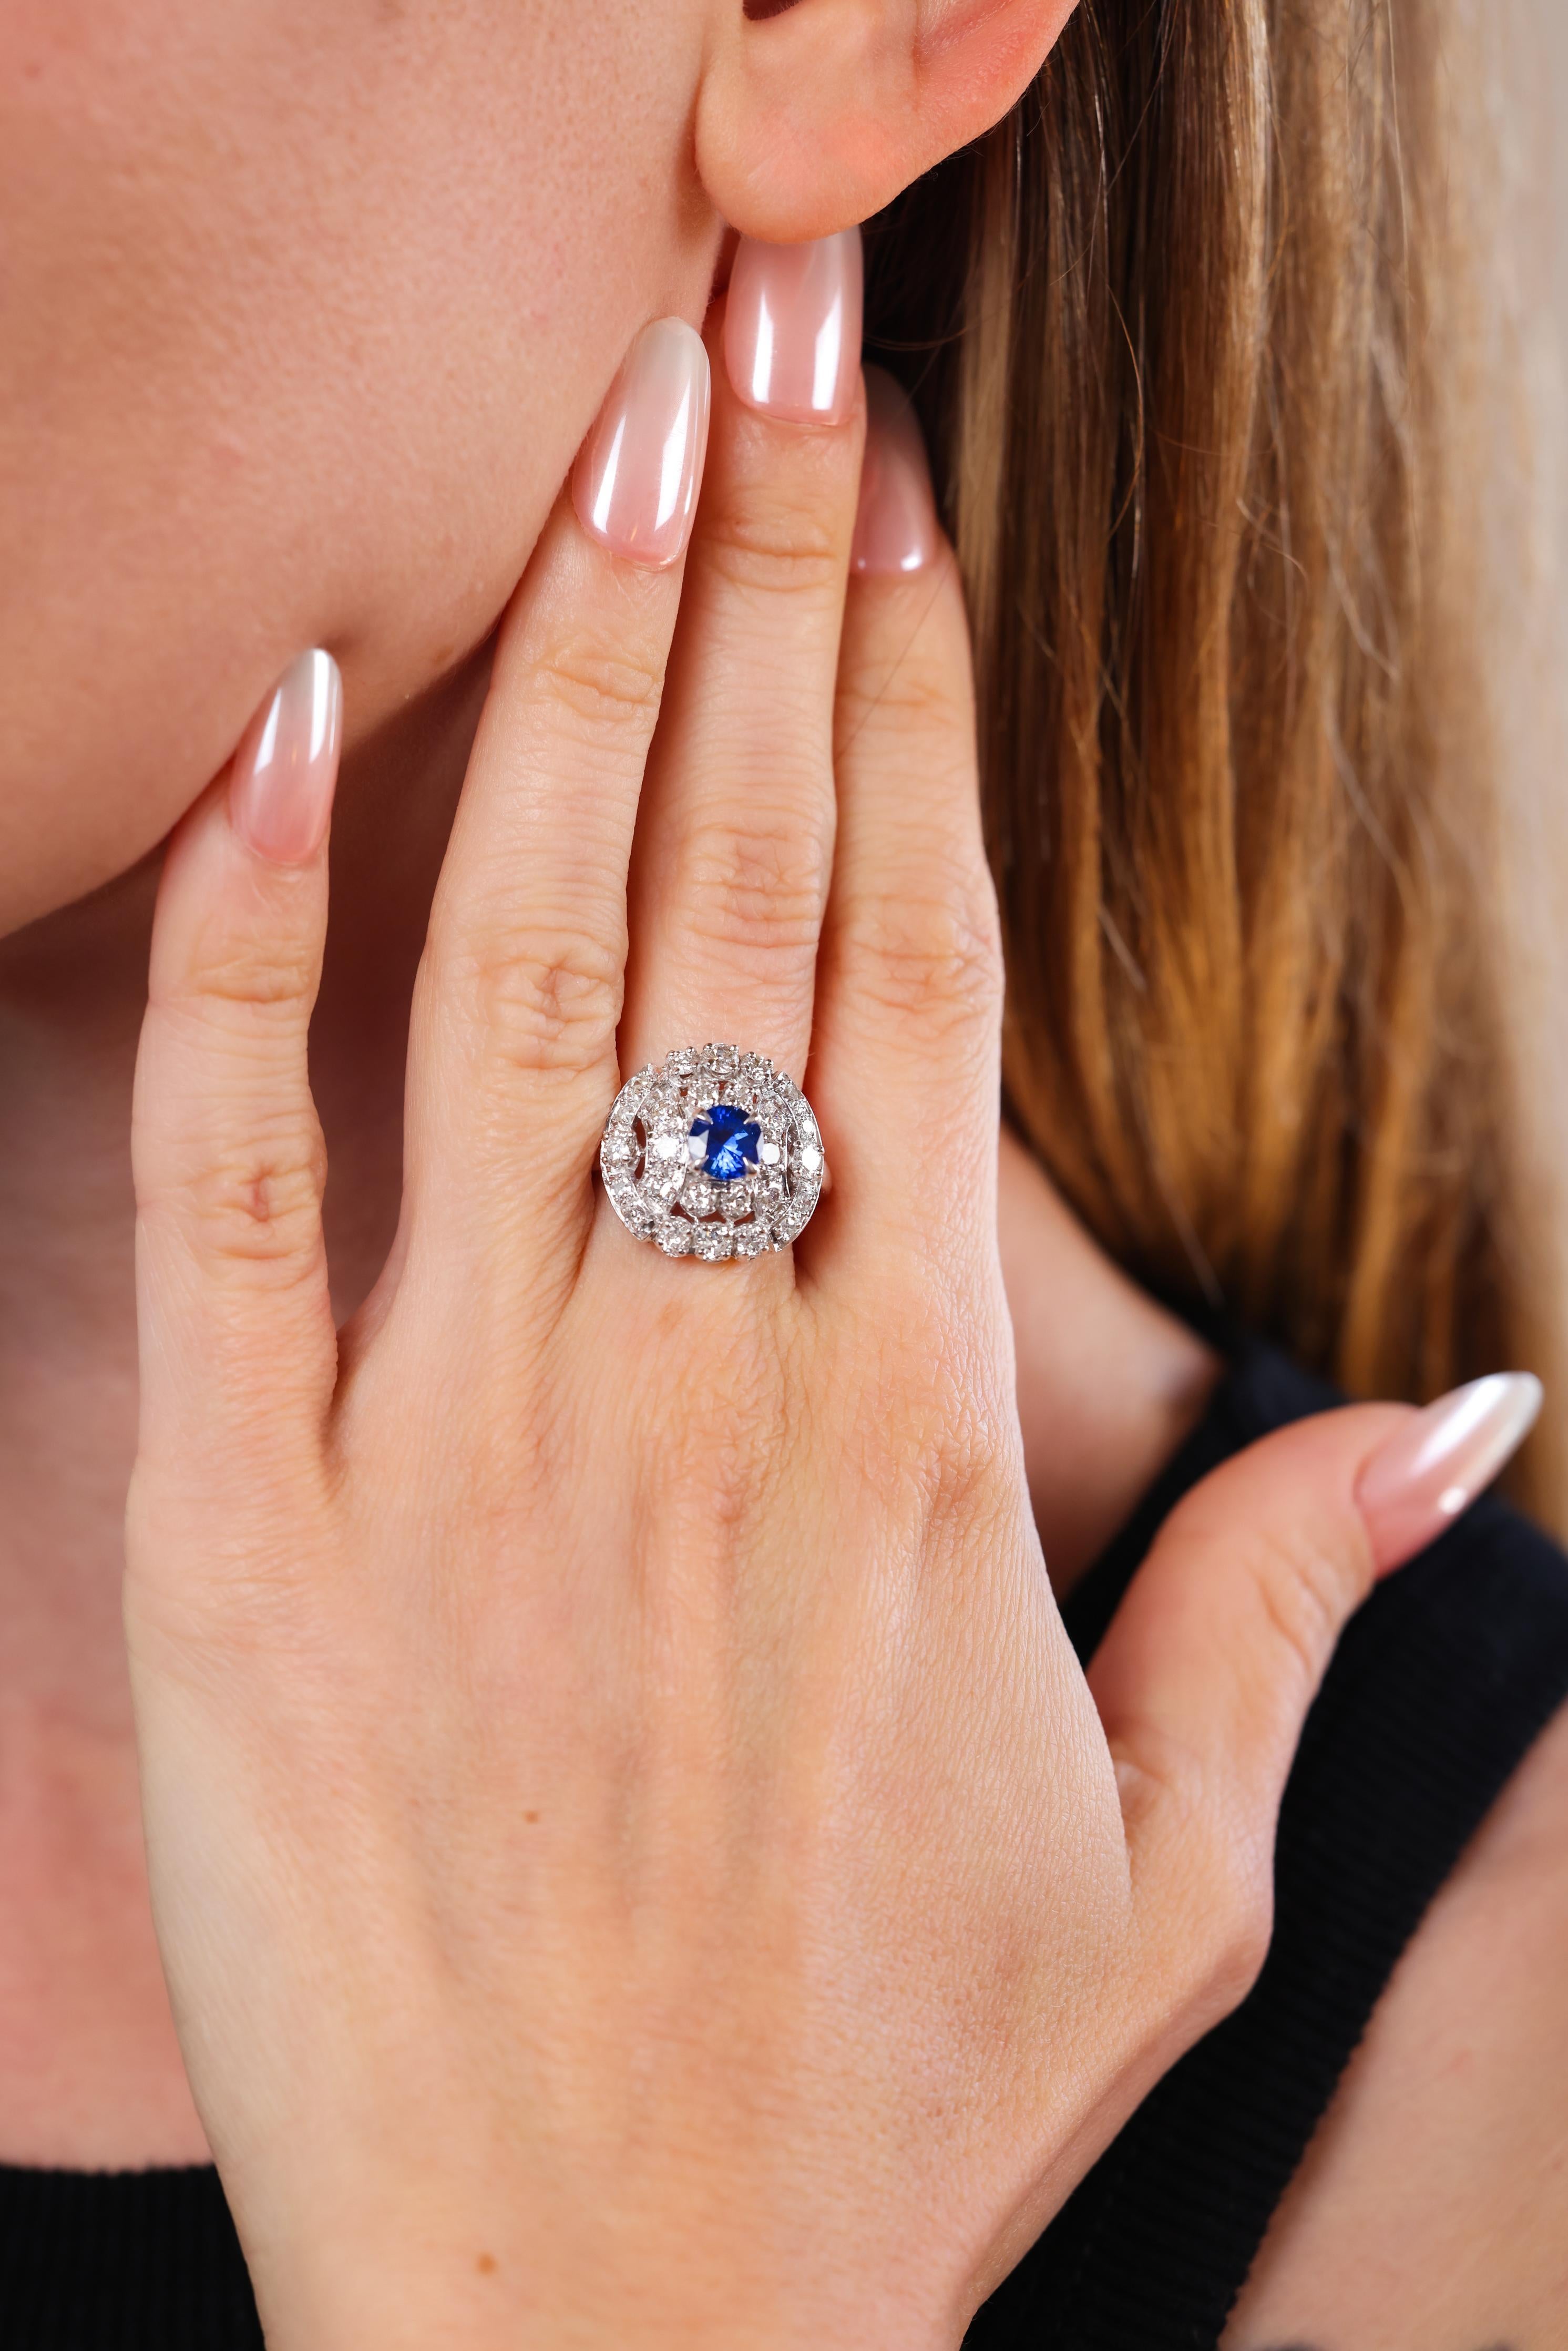 round brilliant cut blue sapphire weighing approximately 1.10 carat  
accented by 28 round brilliant cut diamonds weighing approximately 1 carat
H-I color
VS-SI clarity 
Platinum stamped with purity mark 
circa 1980s 
ring size 8 and can be resized